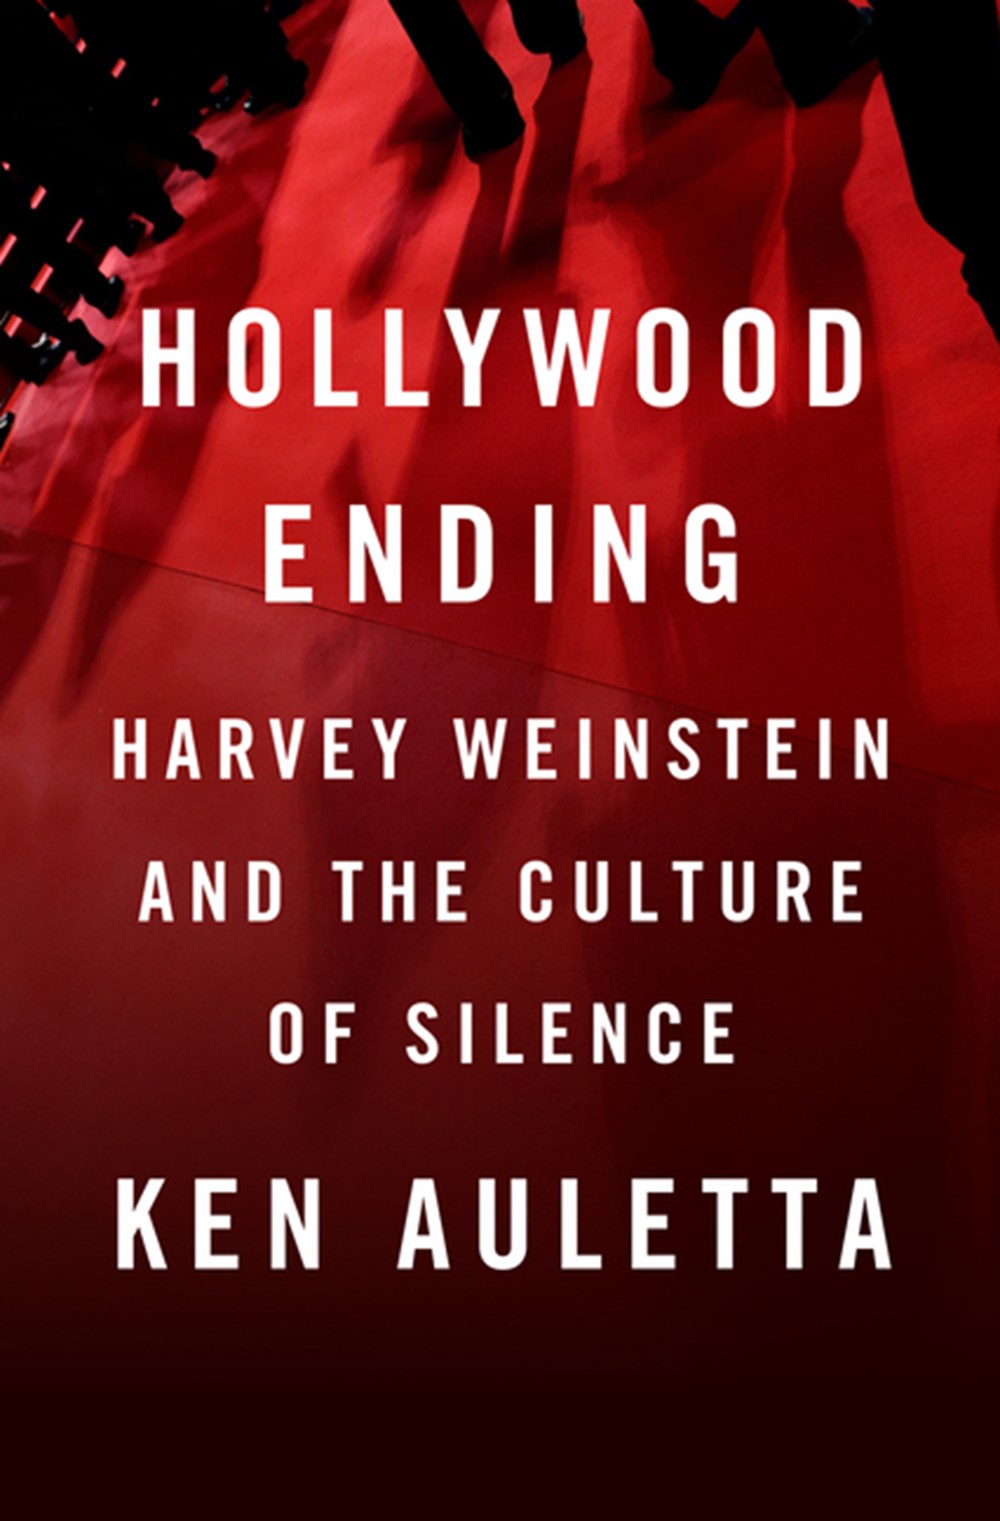 Hollywood Ending Harvey Weinstein and the Culture of Complicity